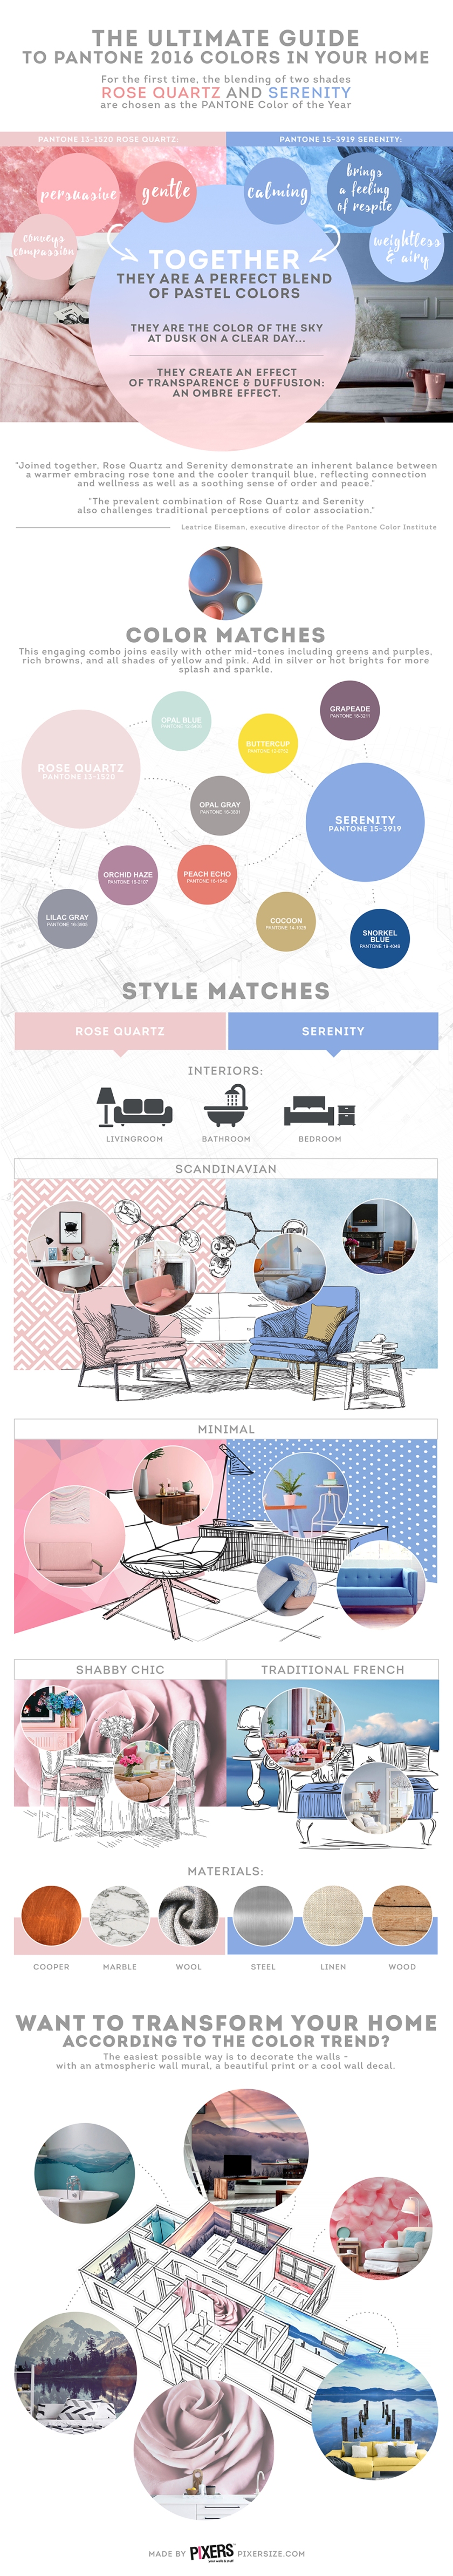 the-ultimate-guide-to-pantone-2016-colors-in-your-home_56a106a2ca636.jpg